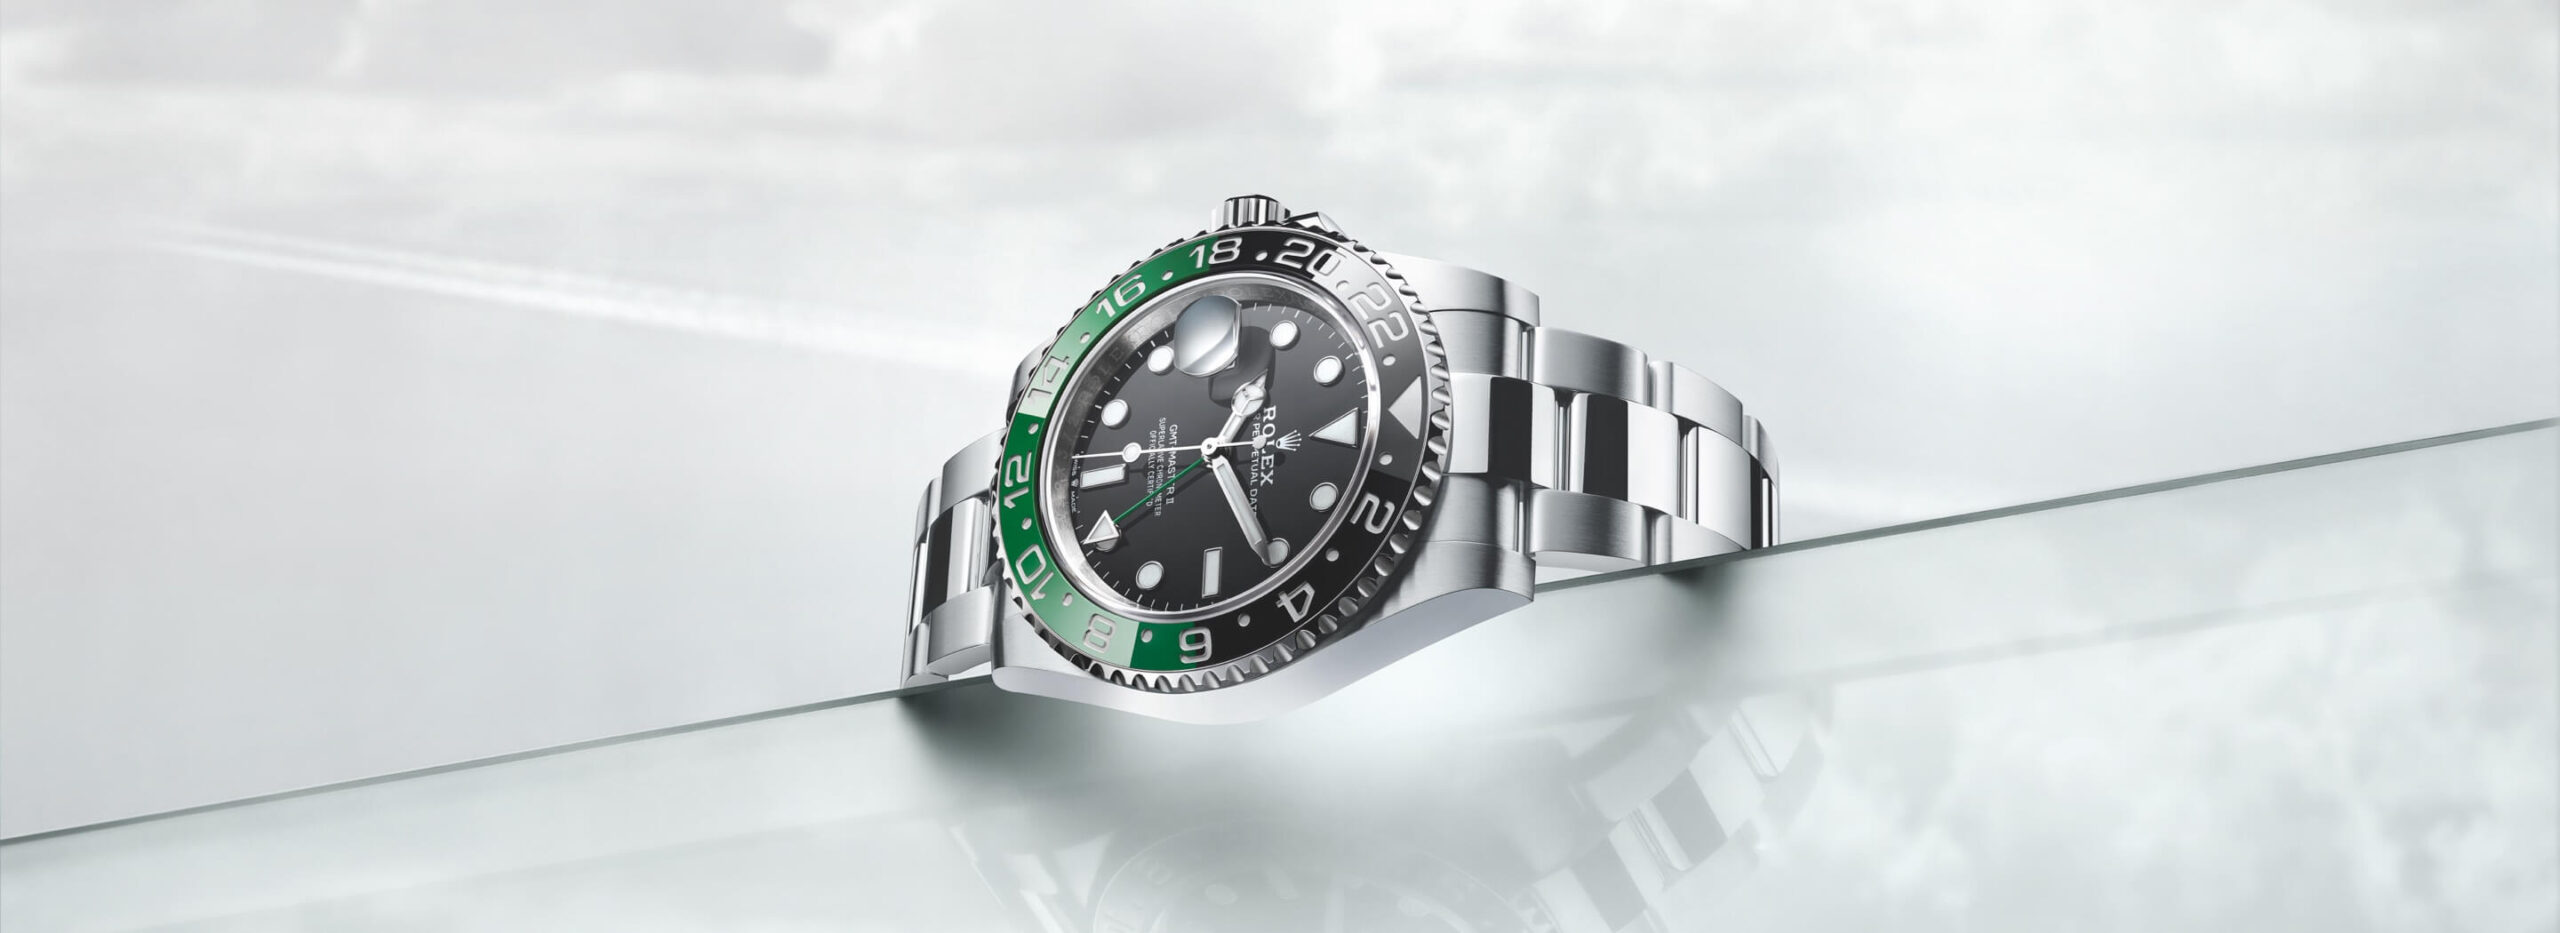 rolex gmt master ii watches - global watch company